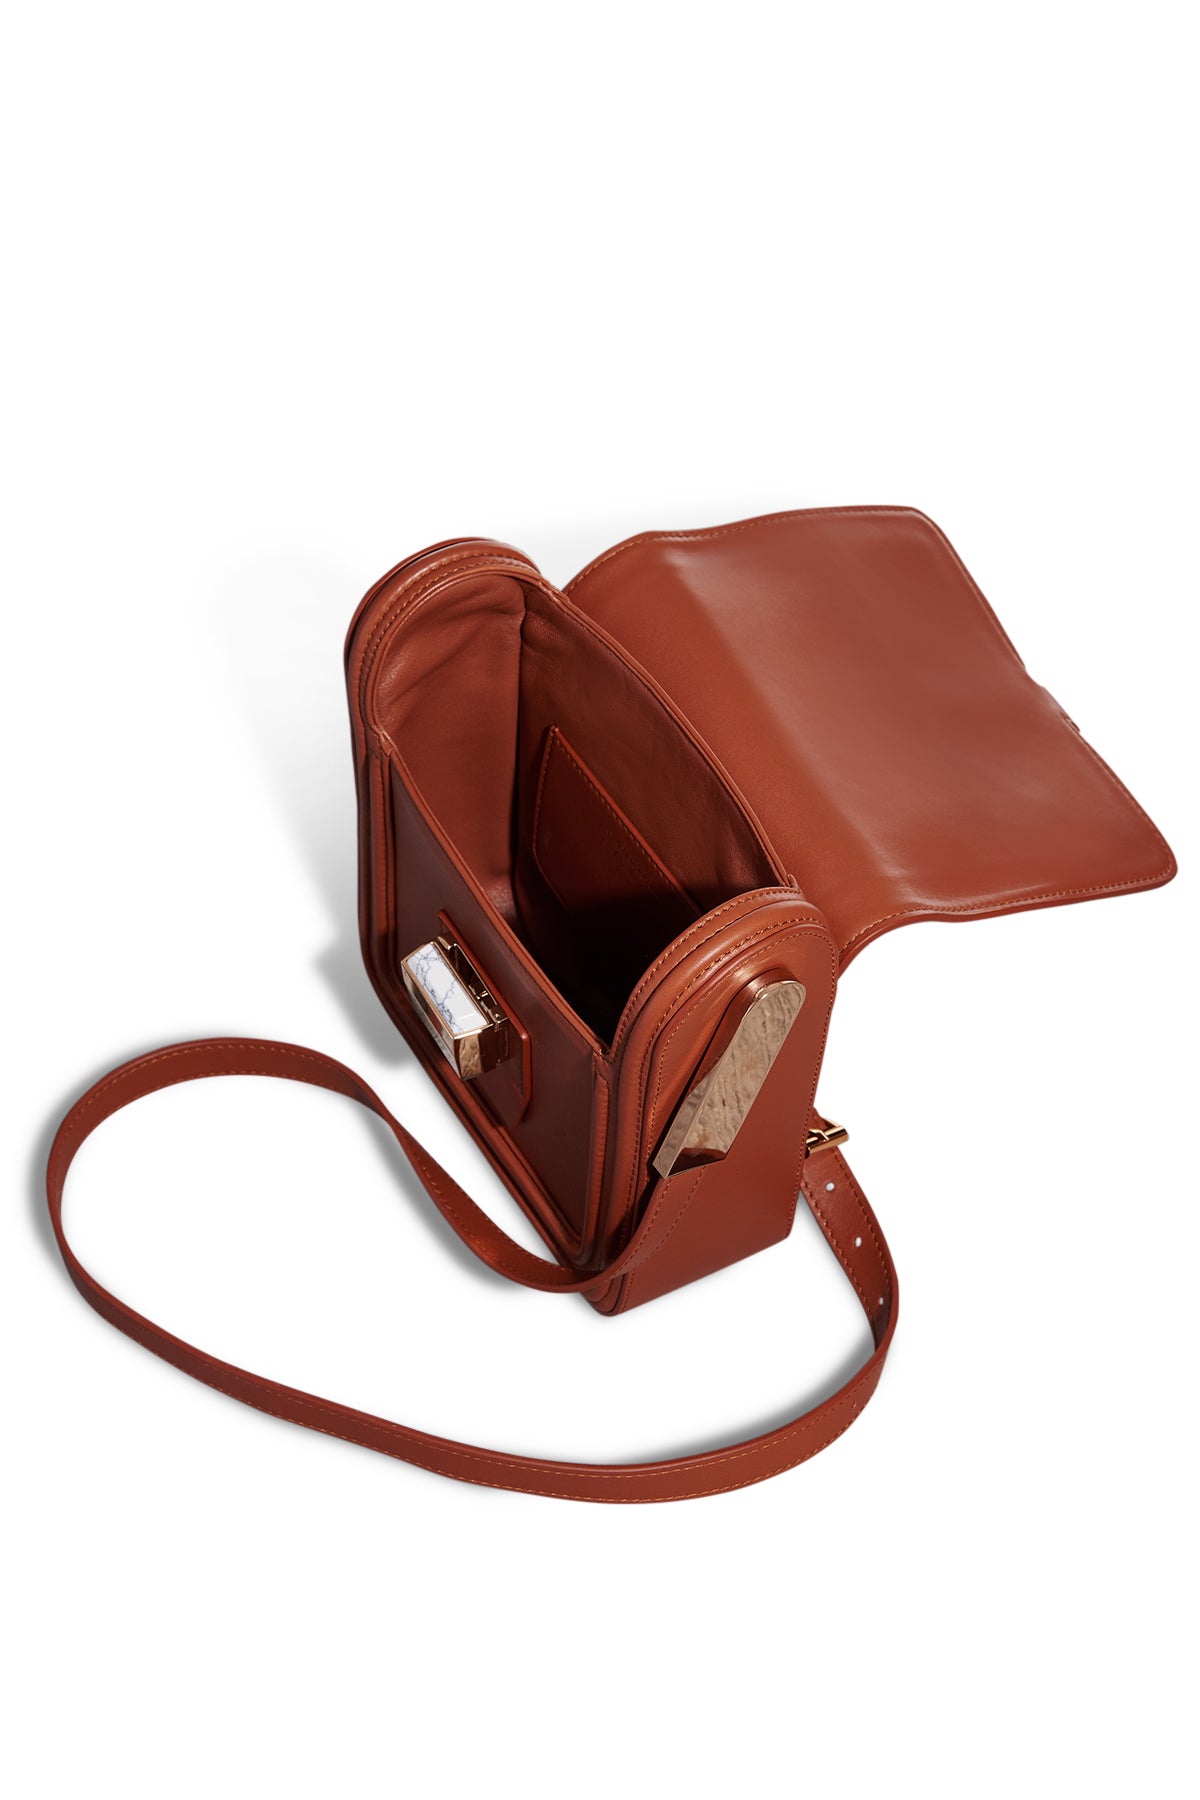 Marvelle Crossbody Bag in Cognac Nappa Leather